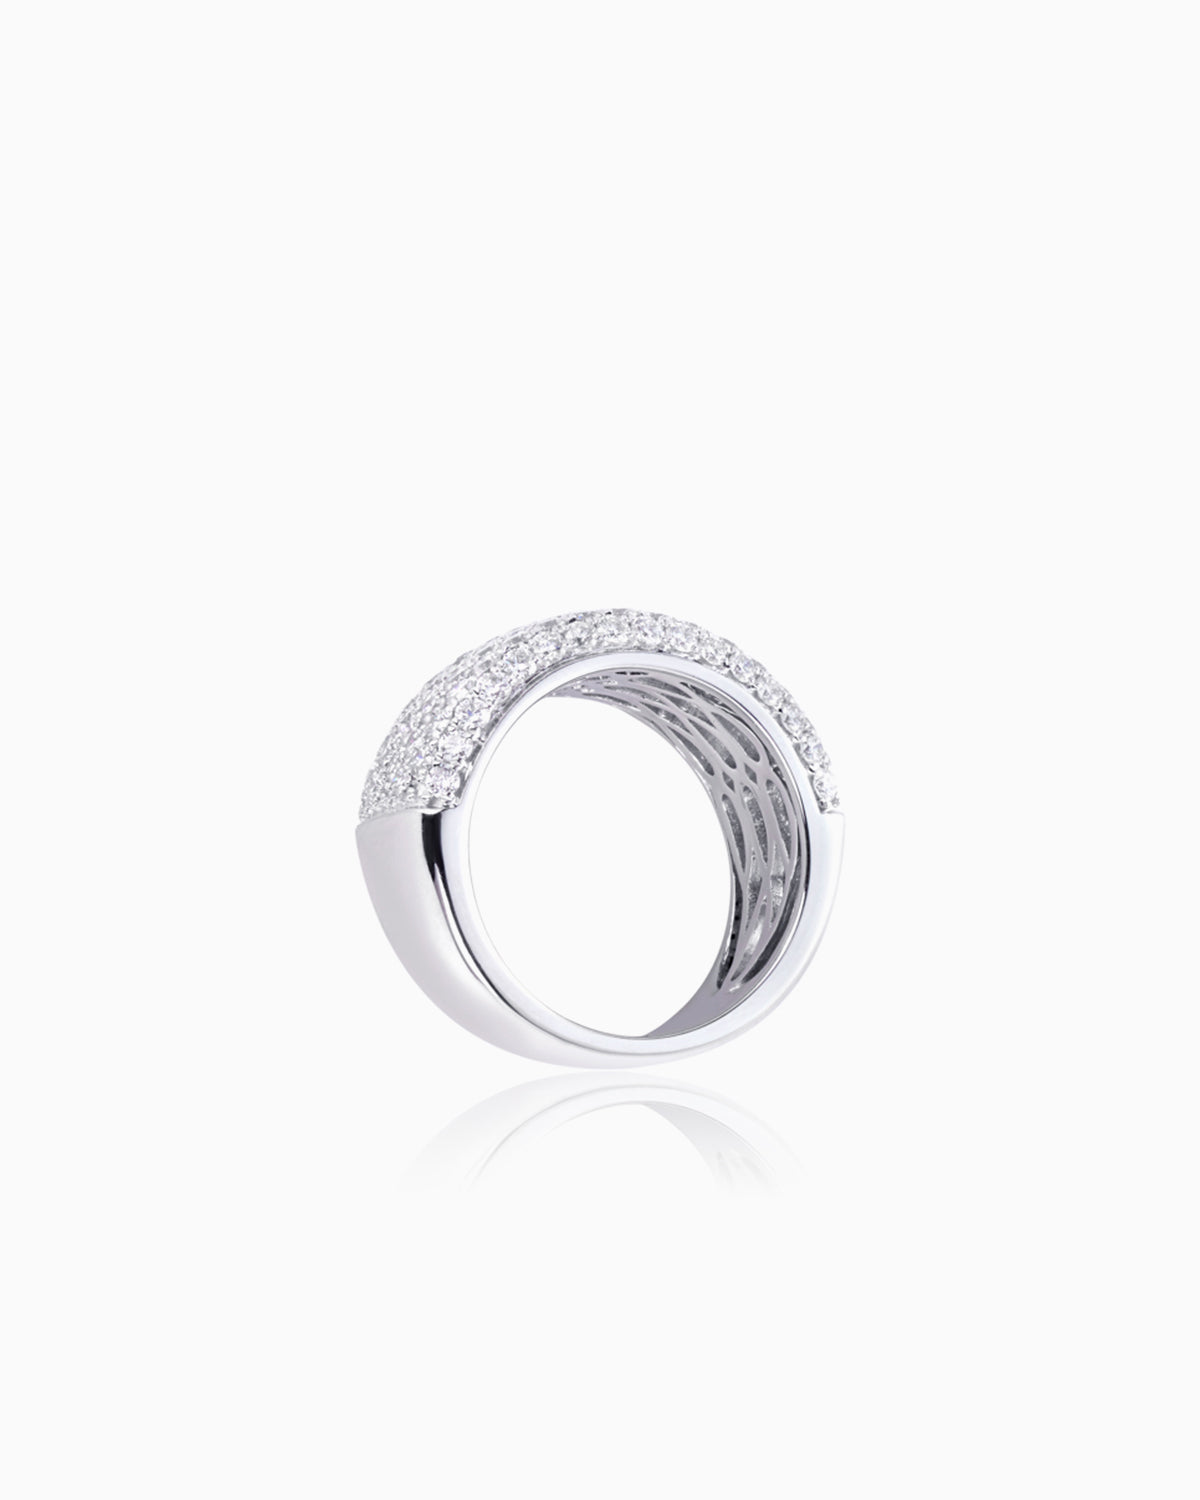 2.31ct pave diamond dress ring crafted in 18kwg by claude and me jewellery side view